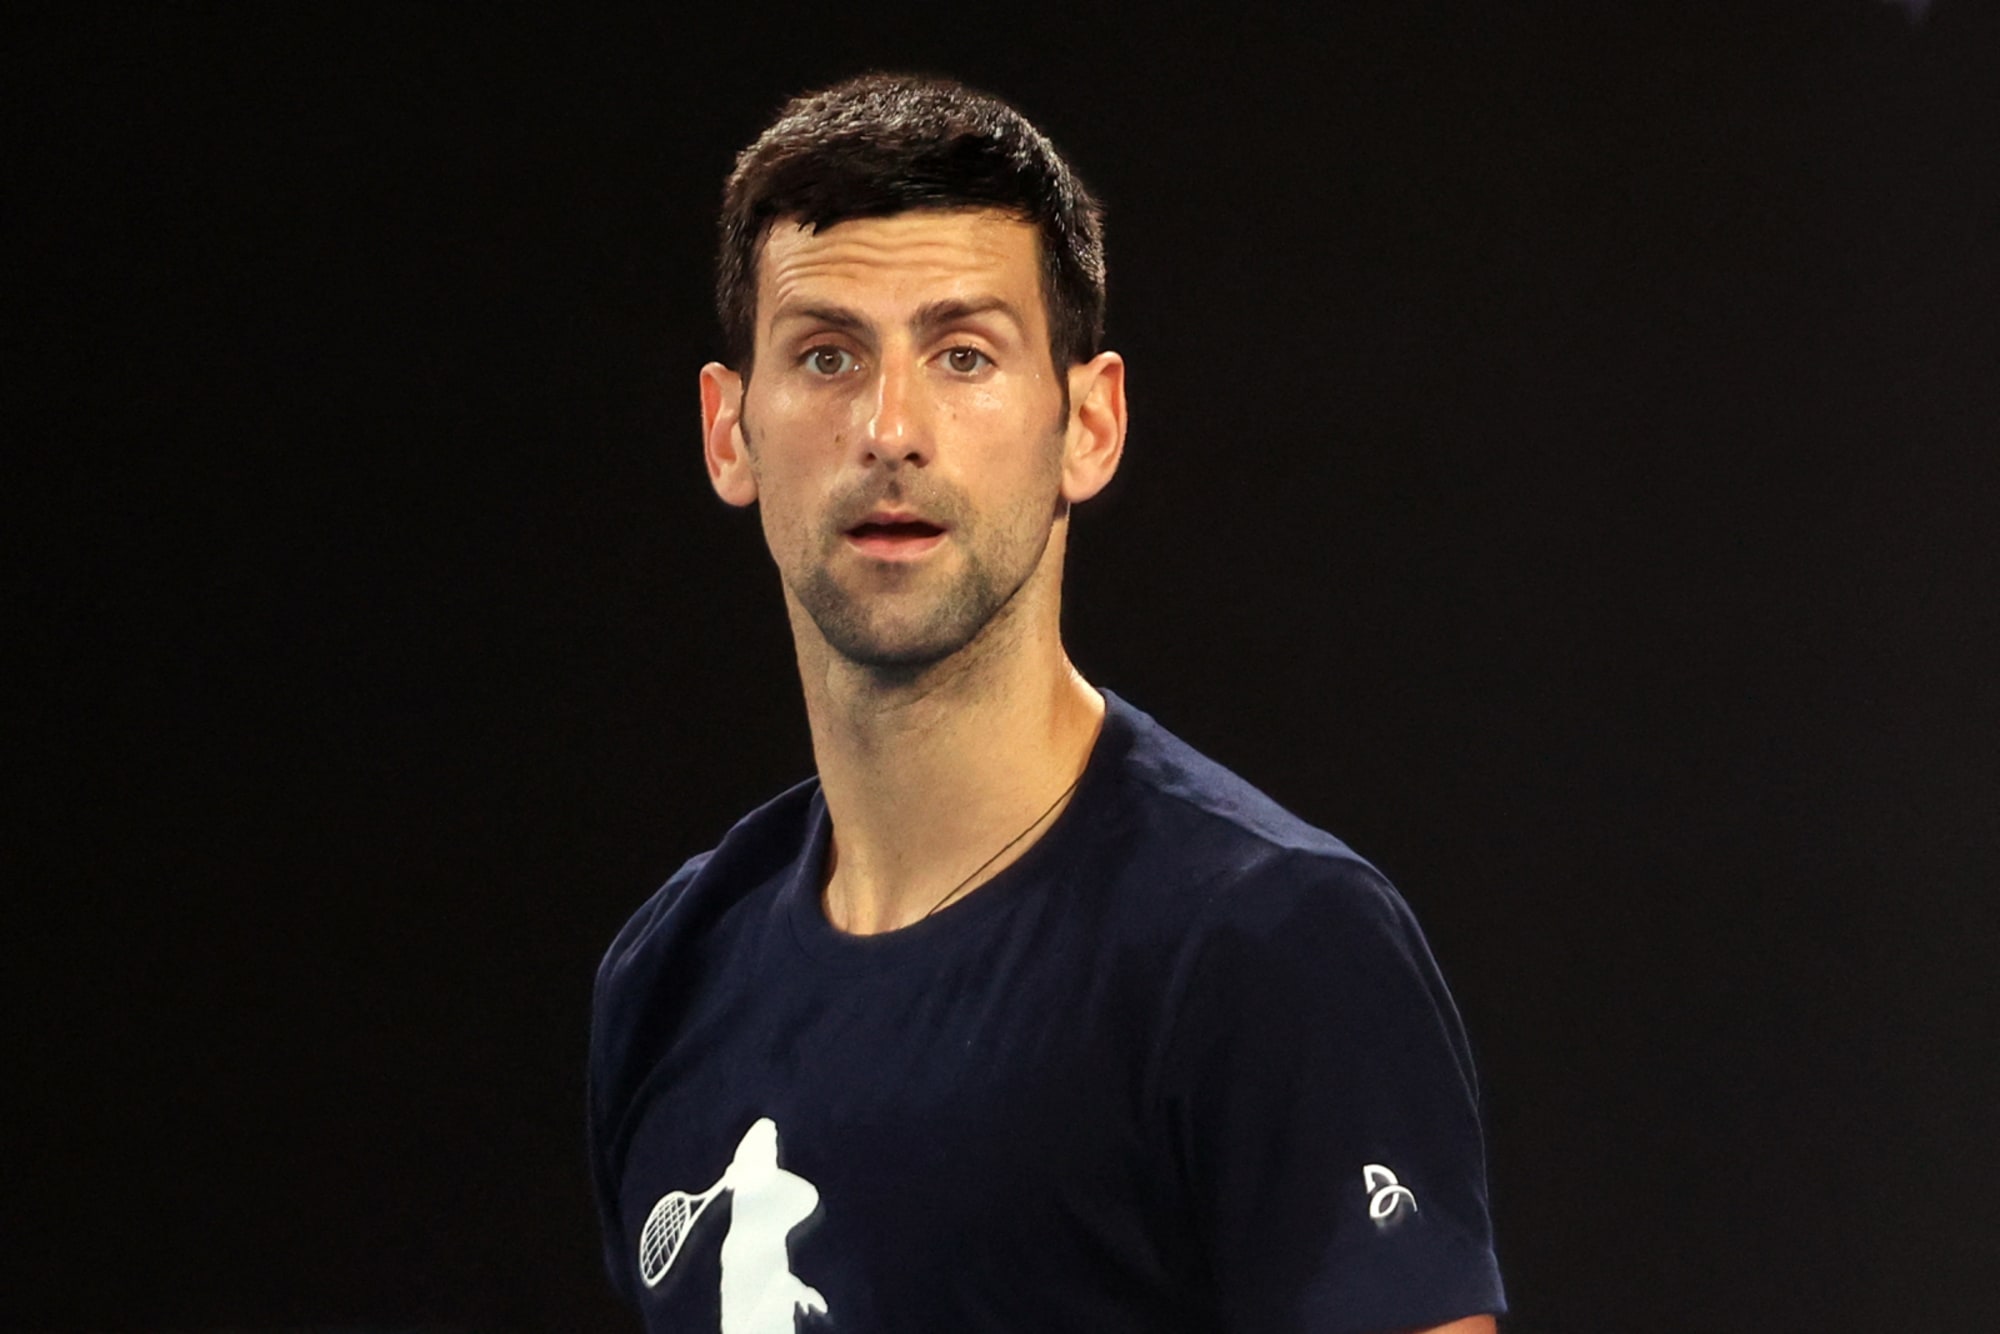 Novak Djokovic’s visa canceled for good and out of Australian Open; will his reputation recover?